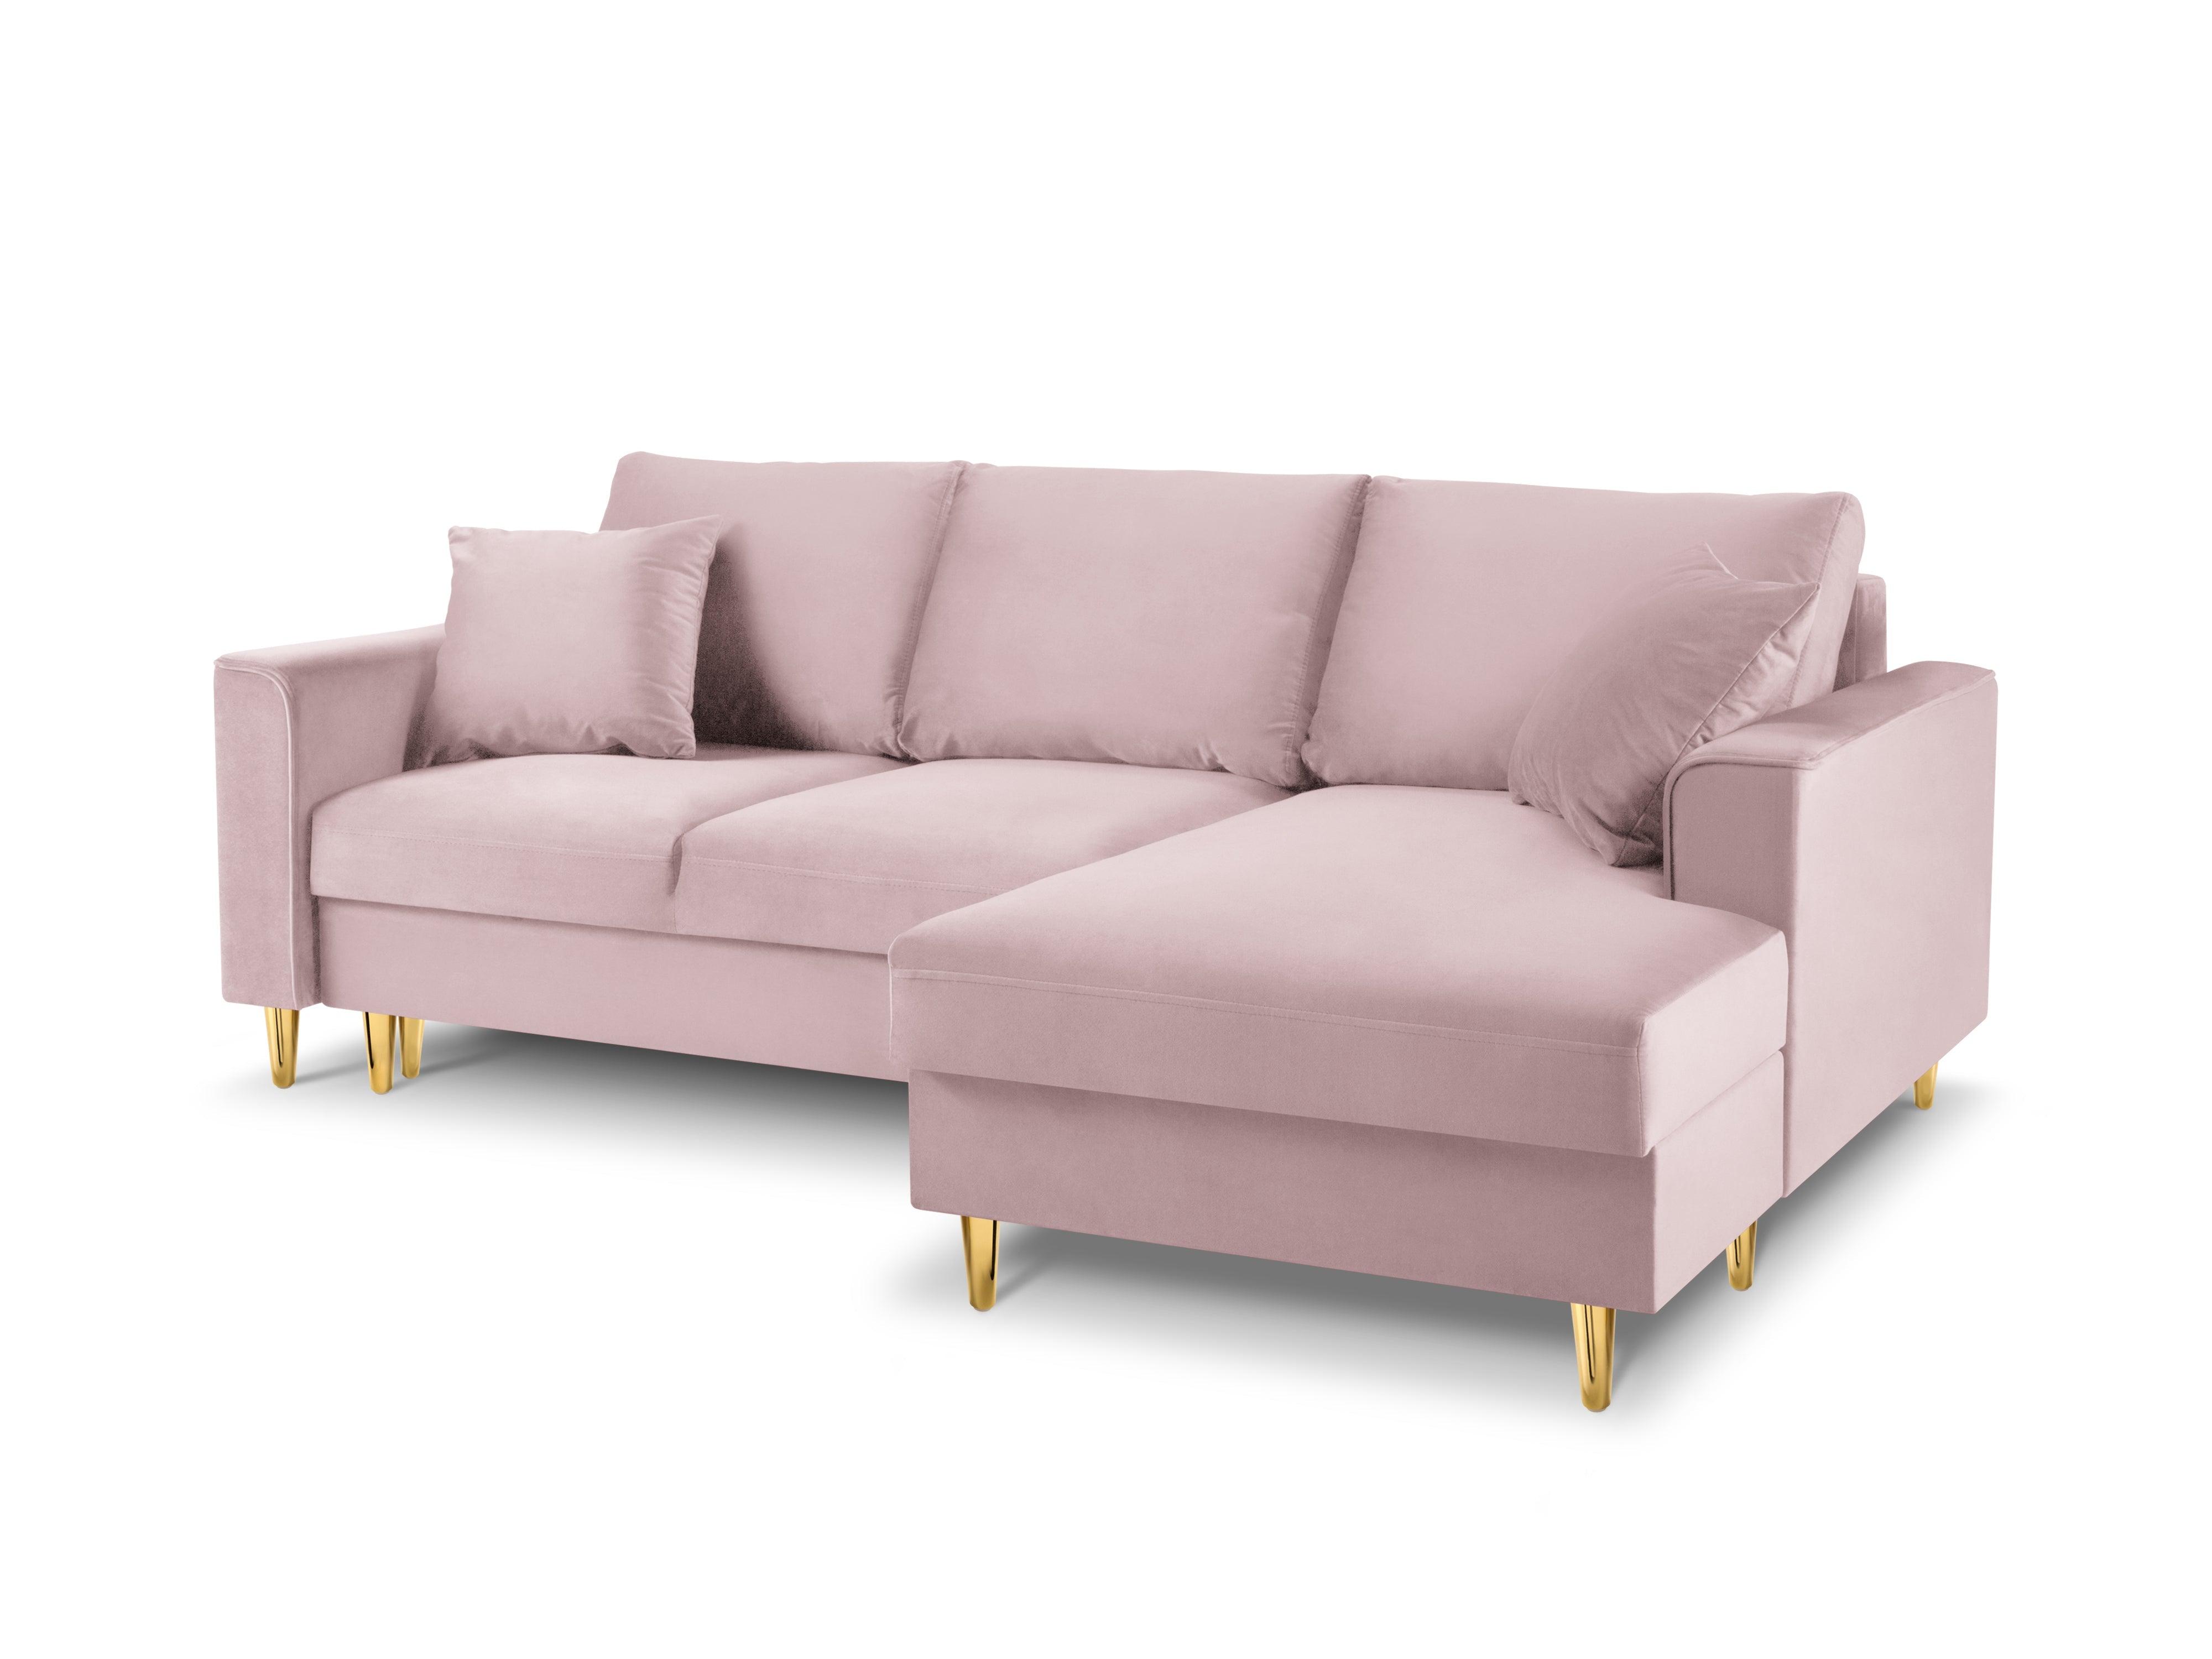 Velvet Right Corner Sofa With Bed Function And Box, "Cartadera", 4 Seats, 225x147x90
Made in Europe, Mazzini Sofas, Eye on Design